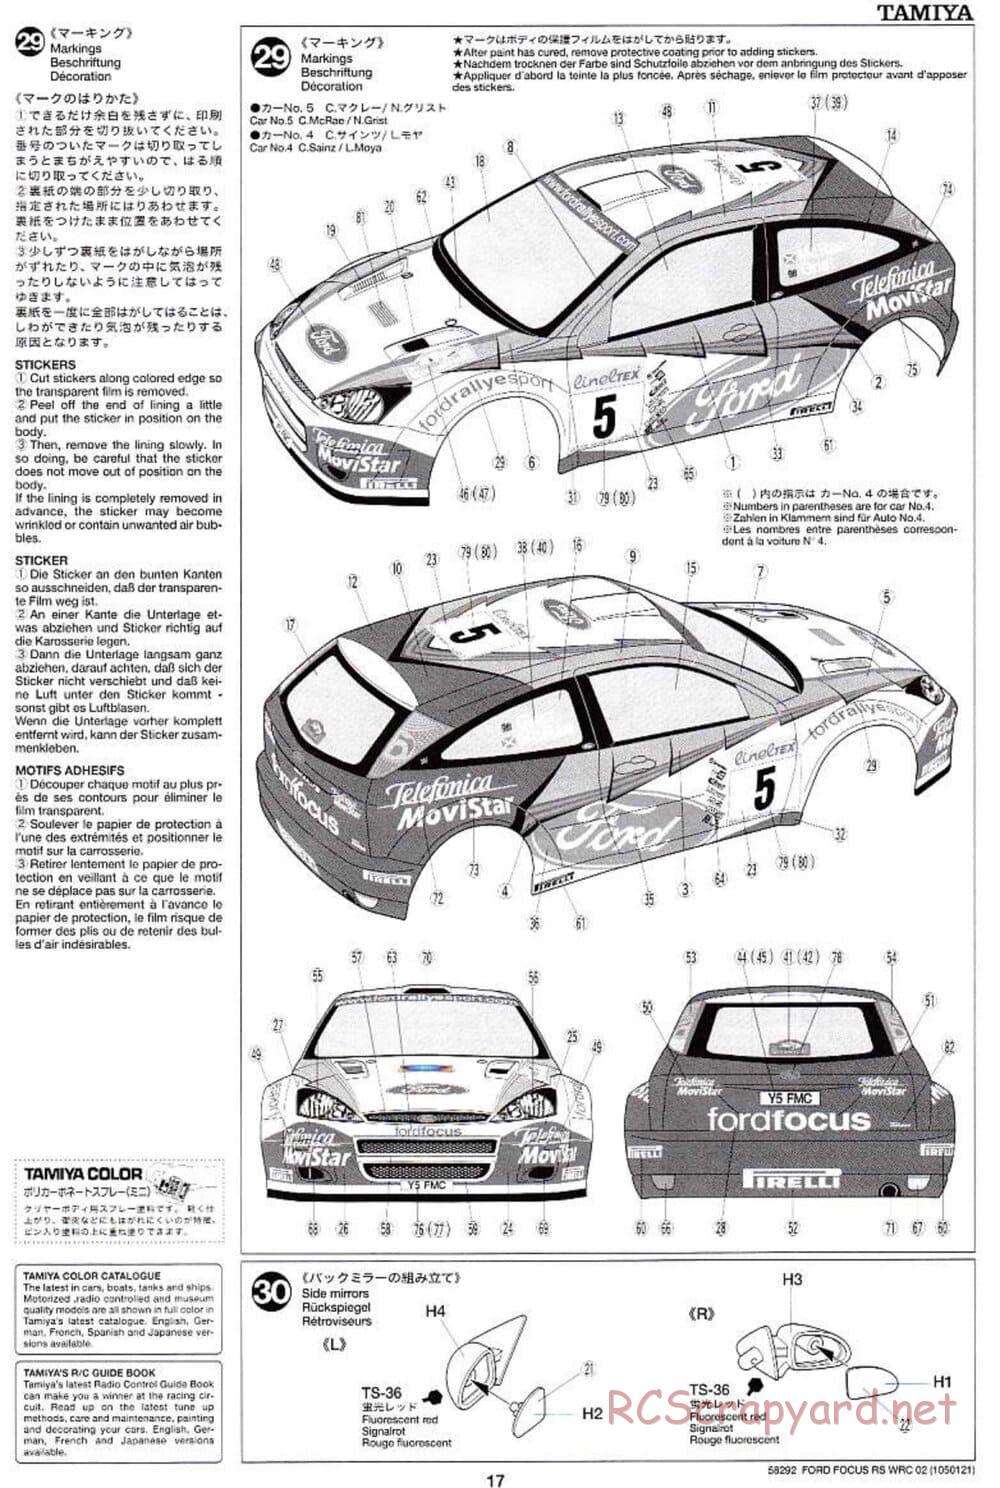 Tamiya - Ford Focus RS WRC 02 - TL-01 Chassis - Manual - Page 17